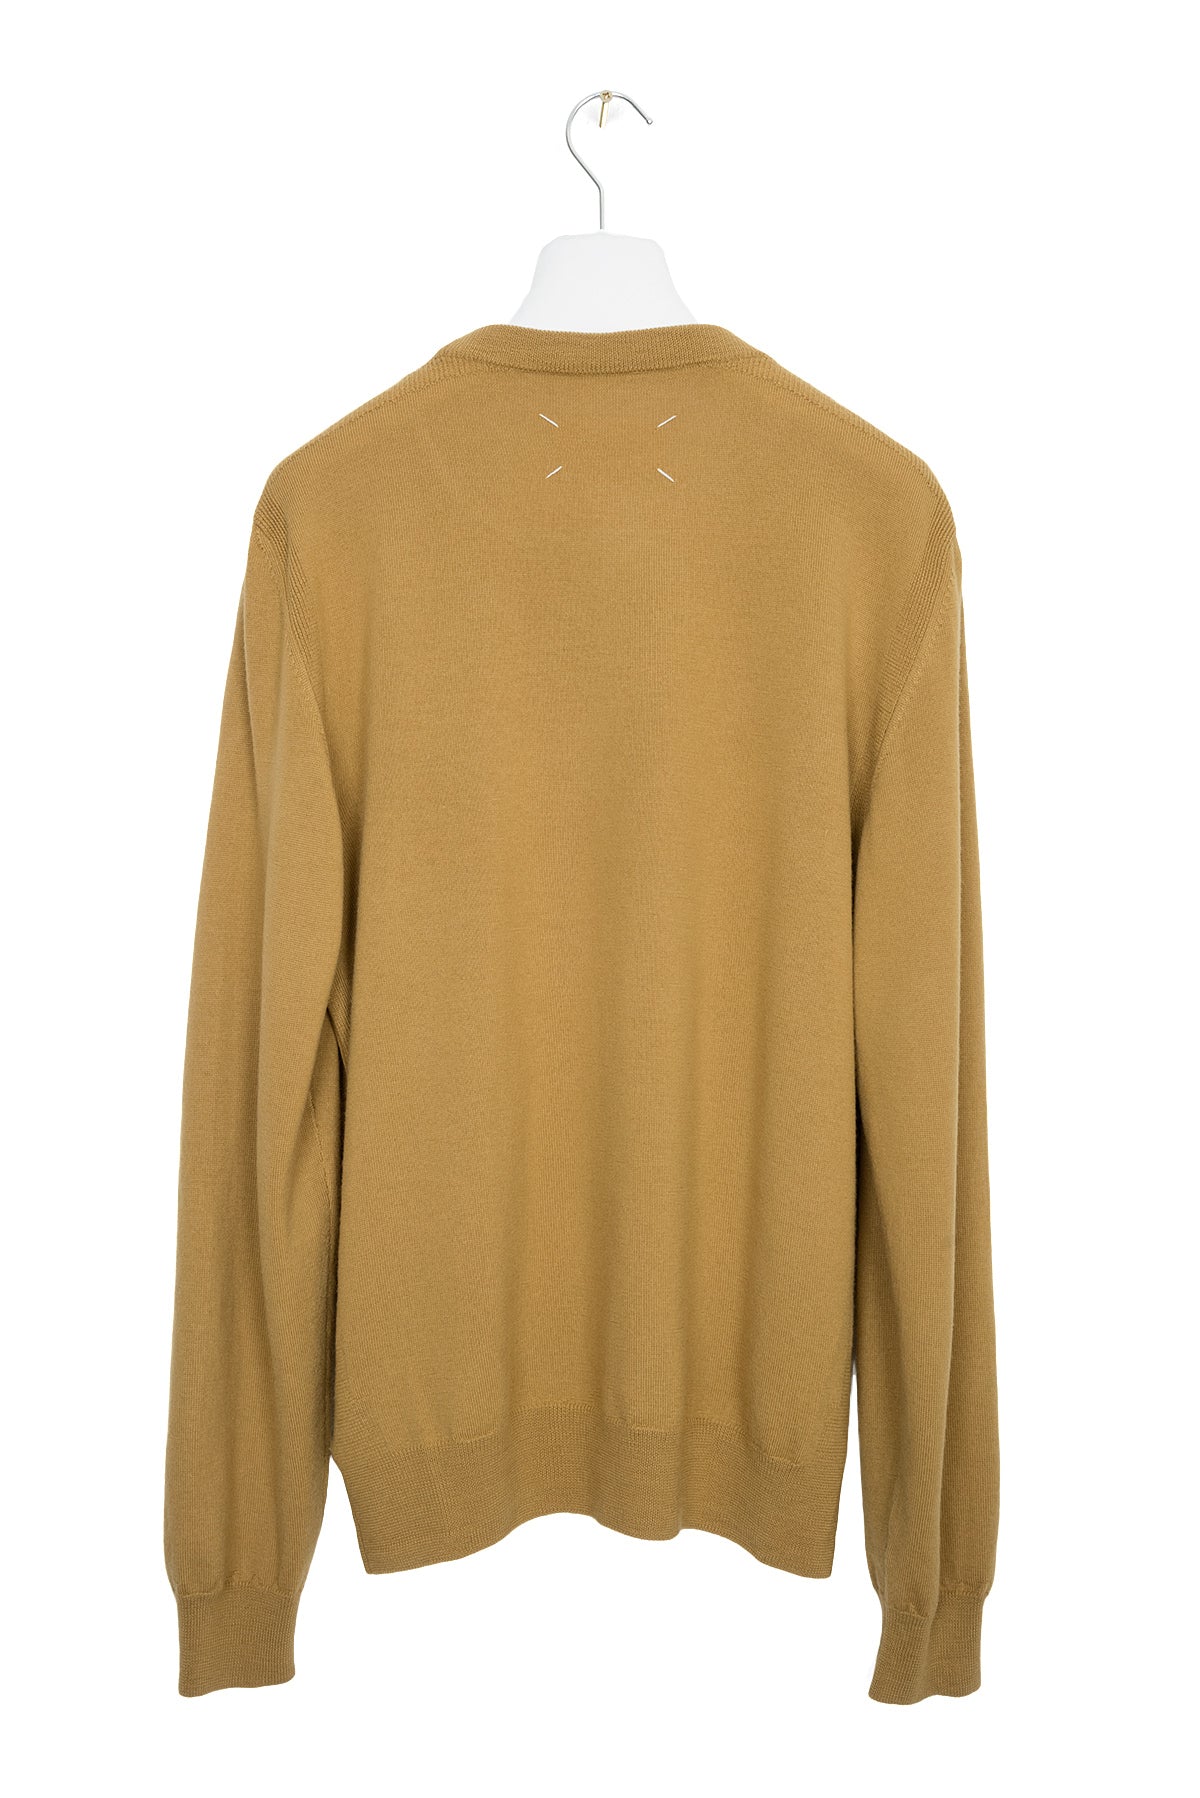 2008 A/W CREWNECK SWEATER WITH RIBBING DETAILS IN FINEST WOOL